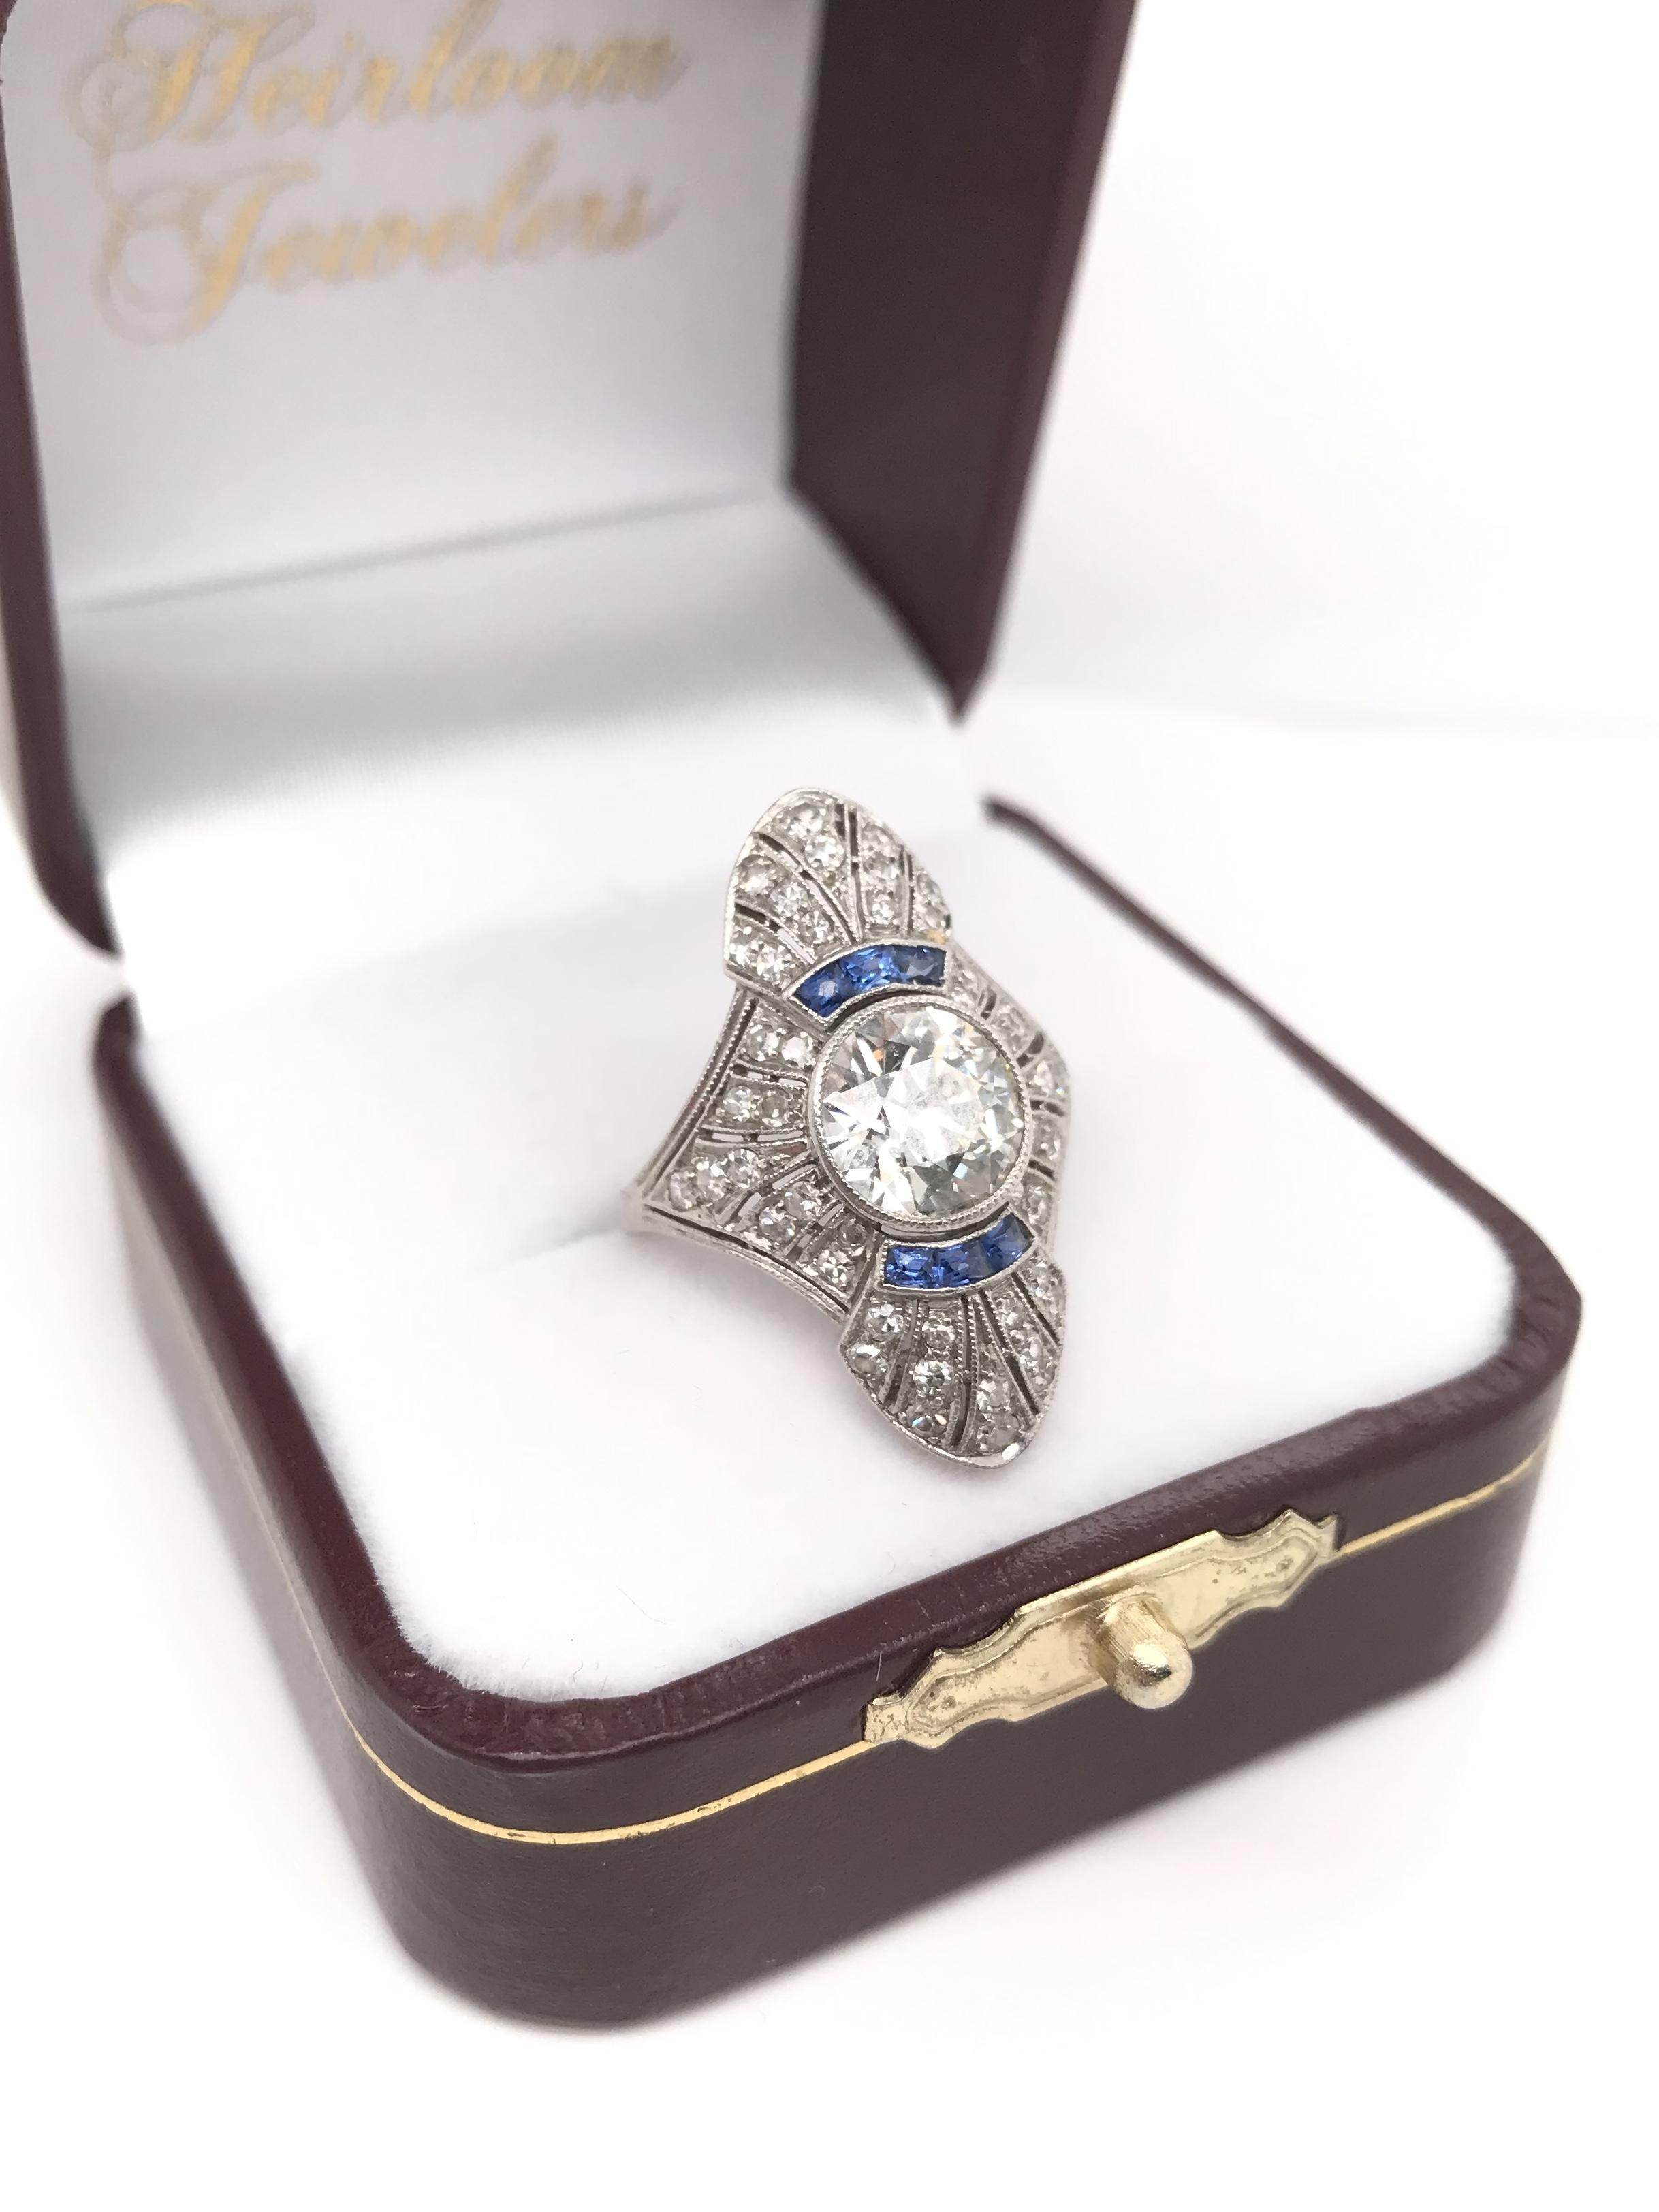 Antique Art Deco Diamond and French Cut Sapphire Dinner Ring 4